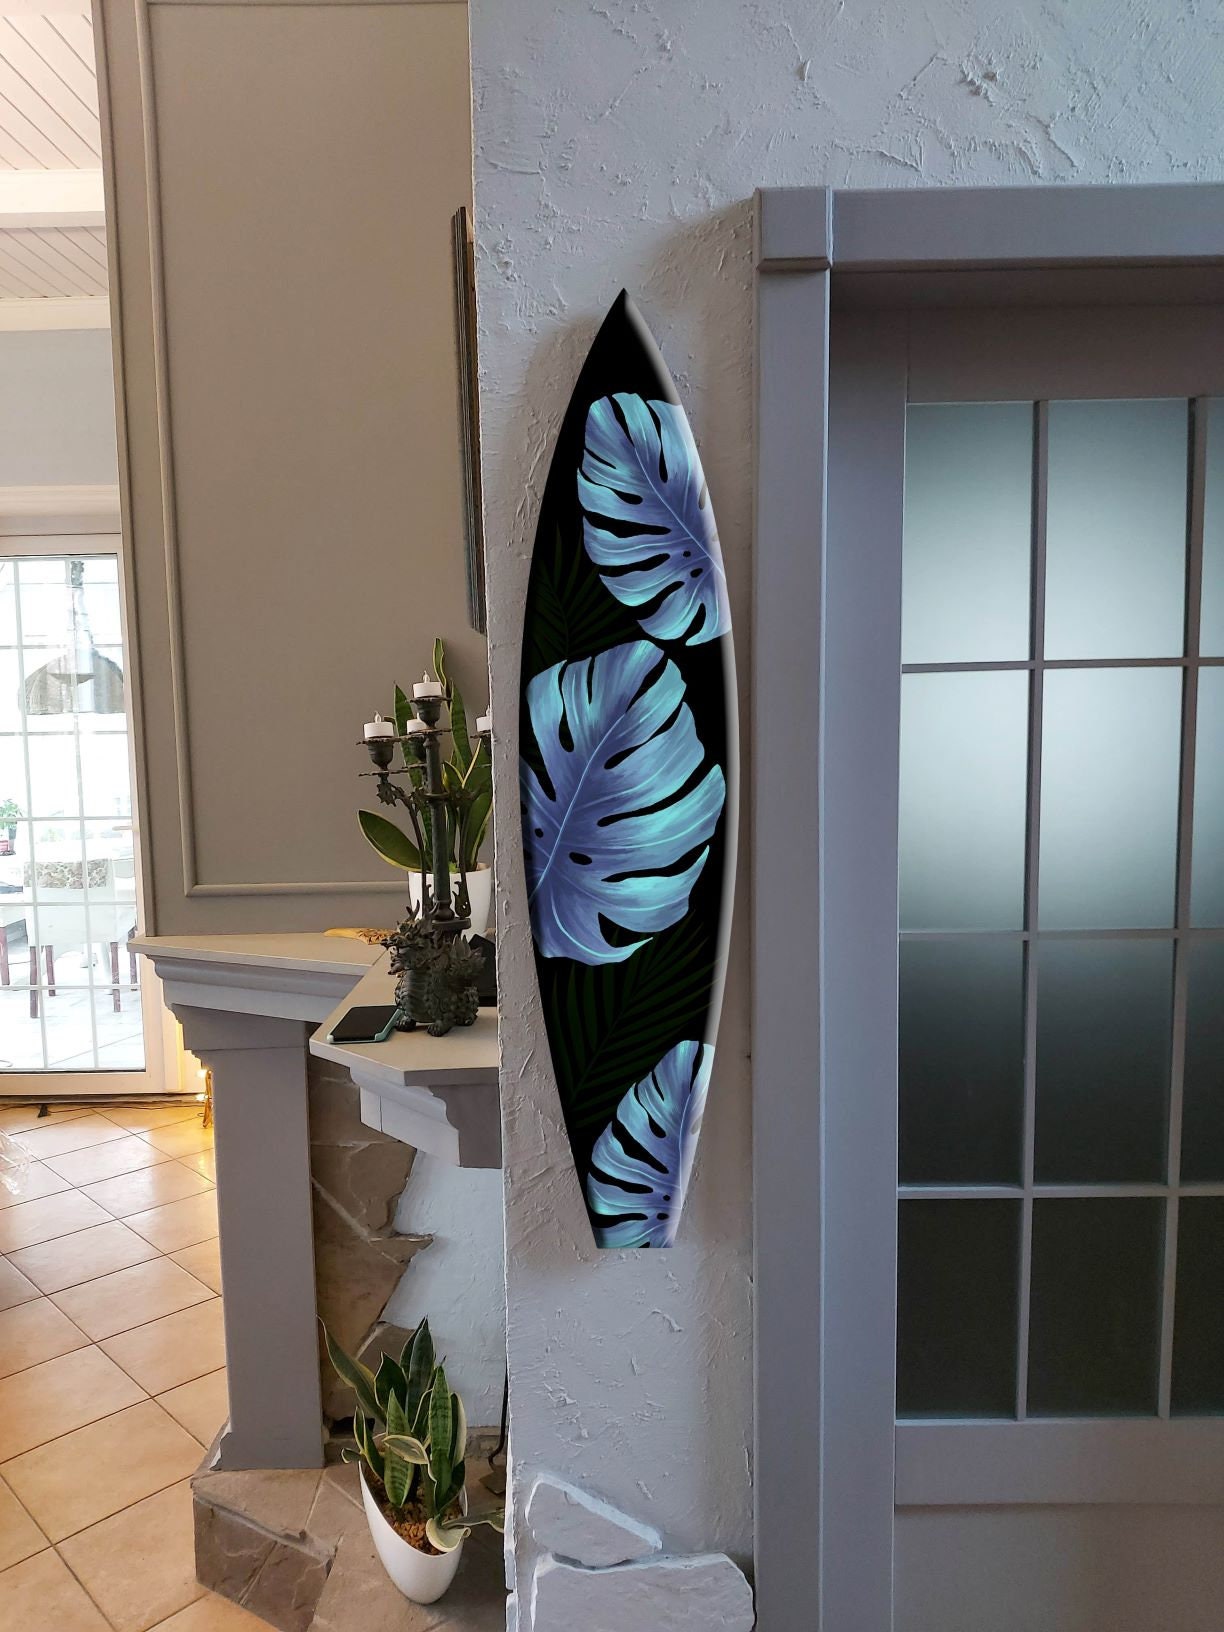 Handmade Decorative Wooden Surfboard with Monstera Leaves - Black & Blue for Tropical Beach Decor